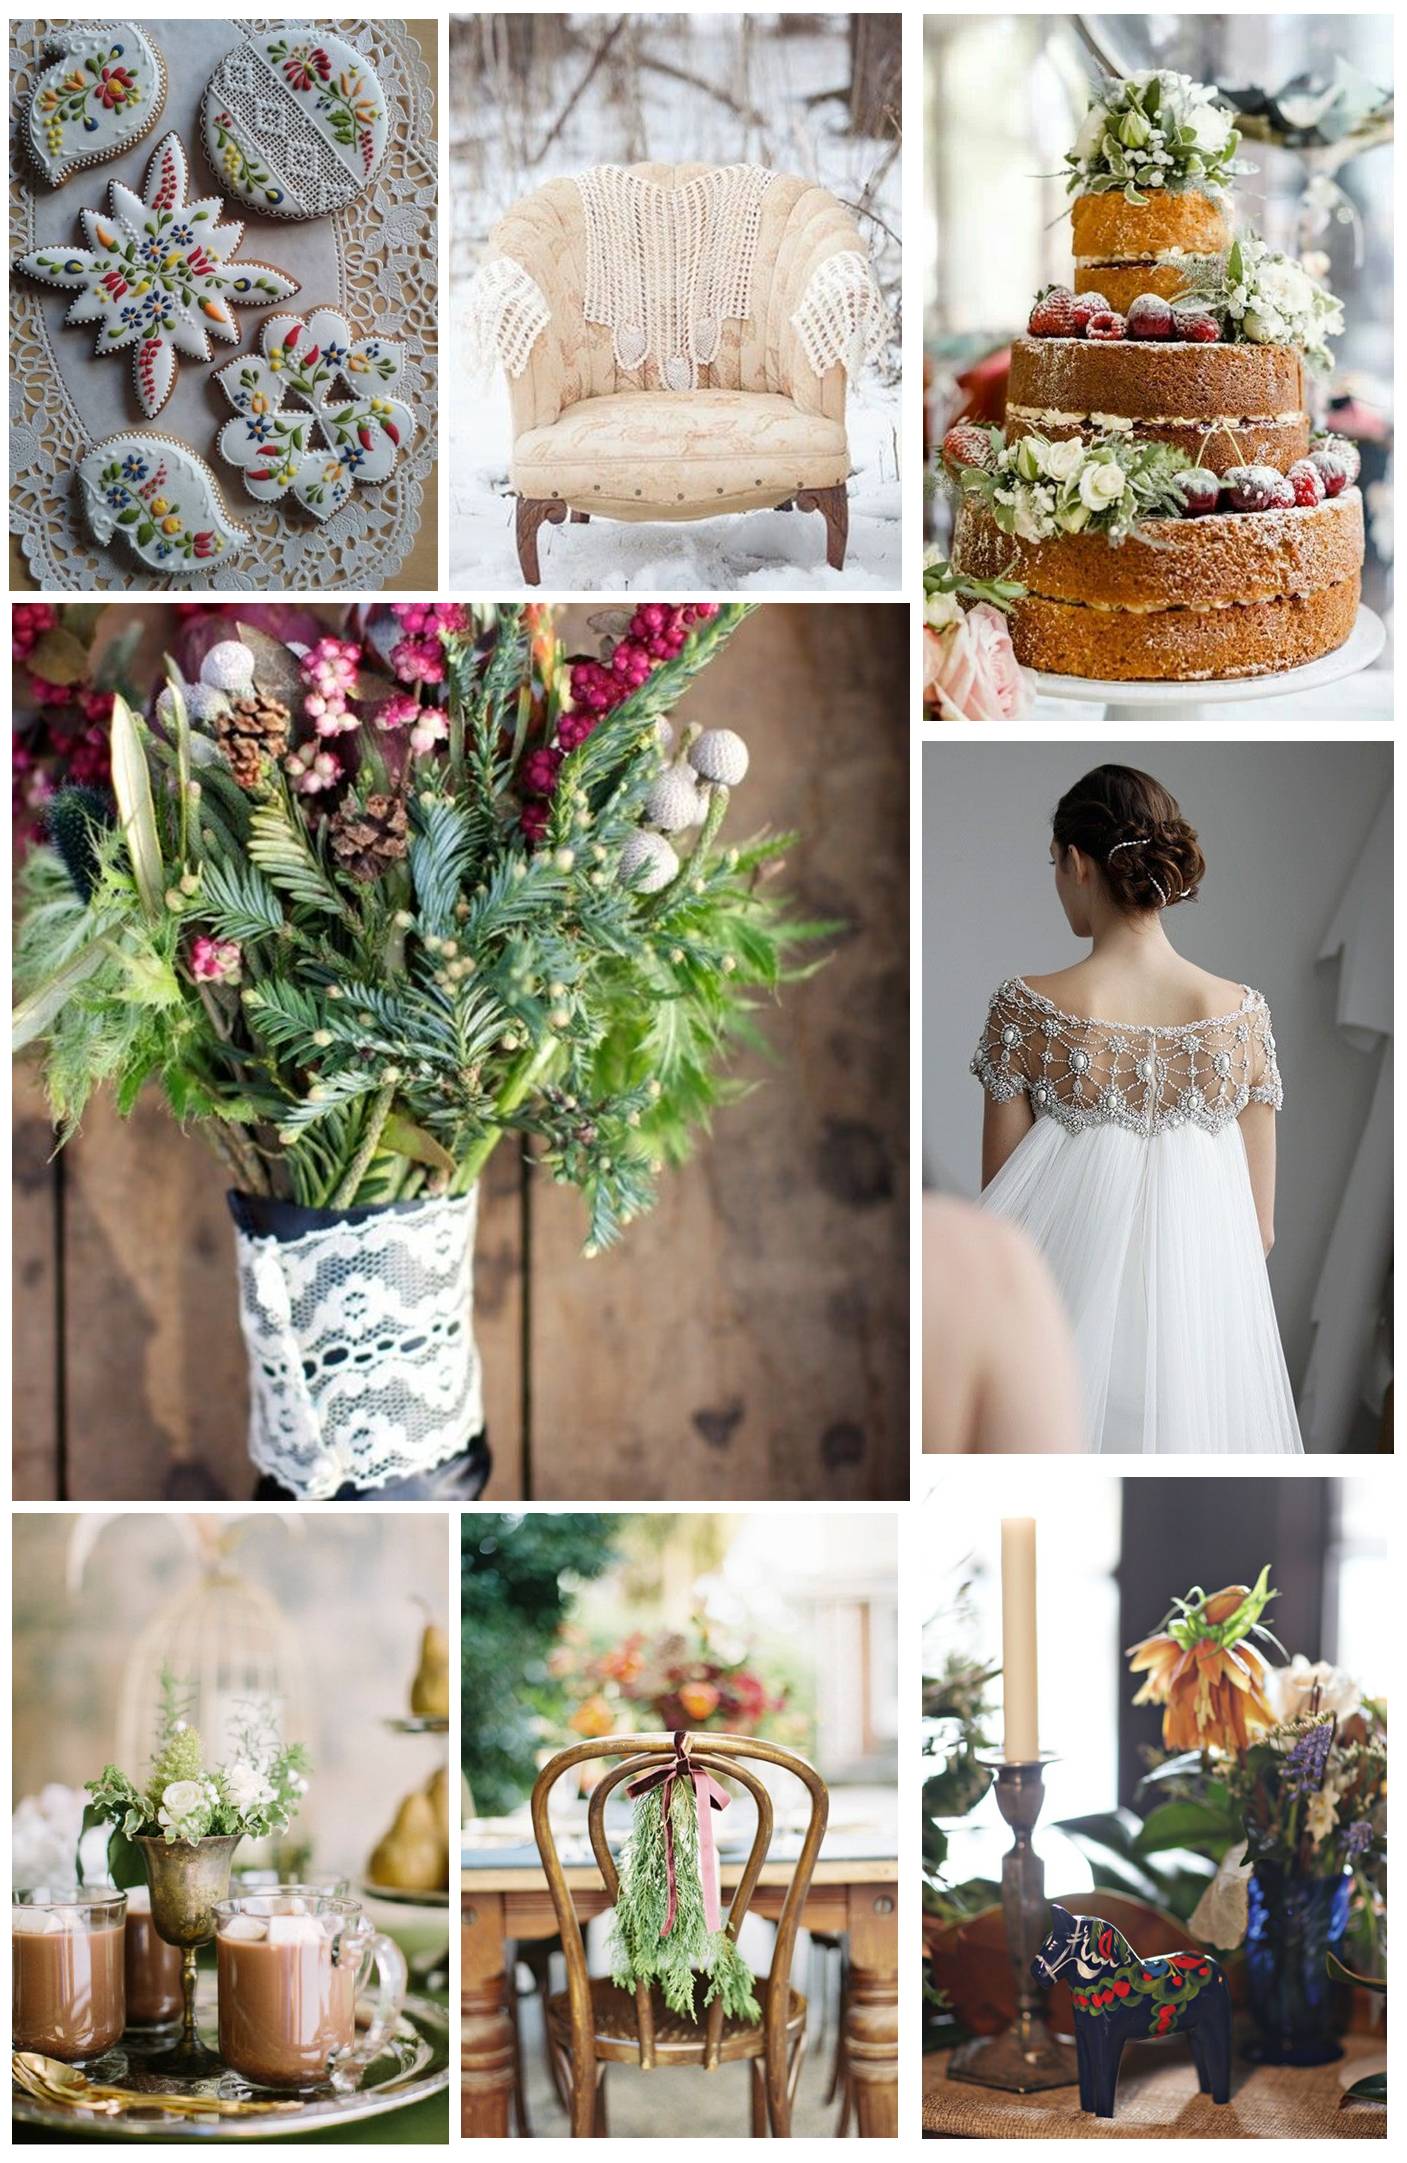 Rising out of the ocean winter wedding  moodboard